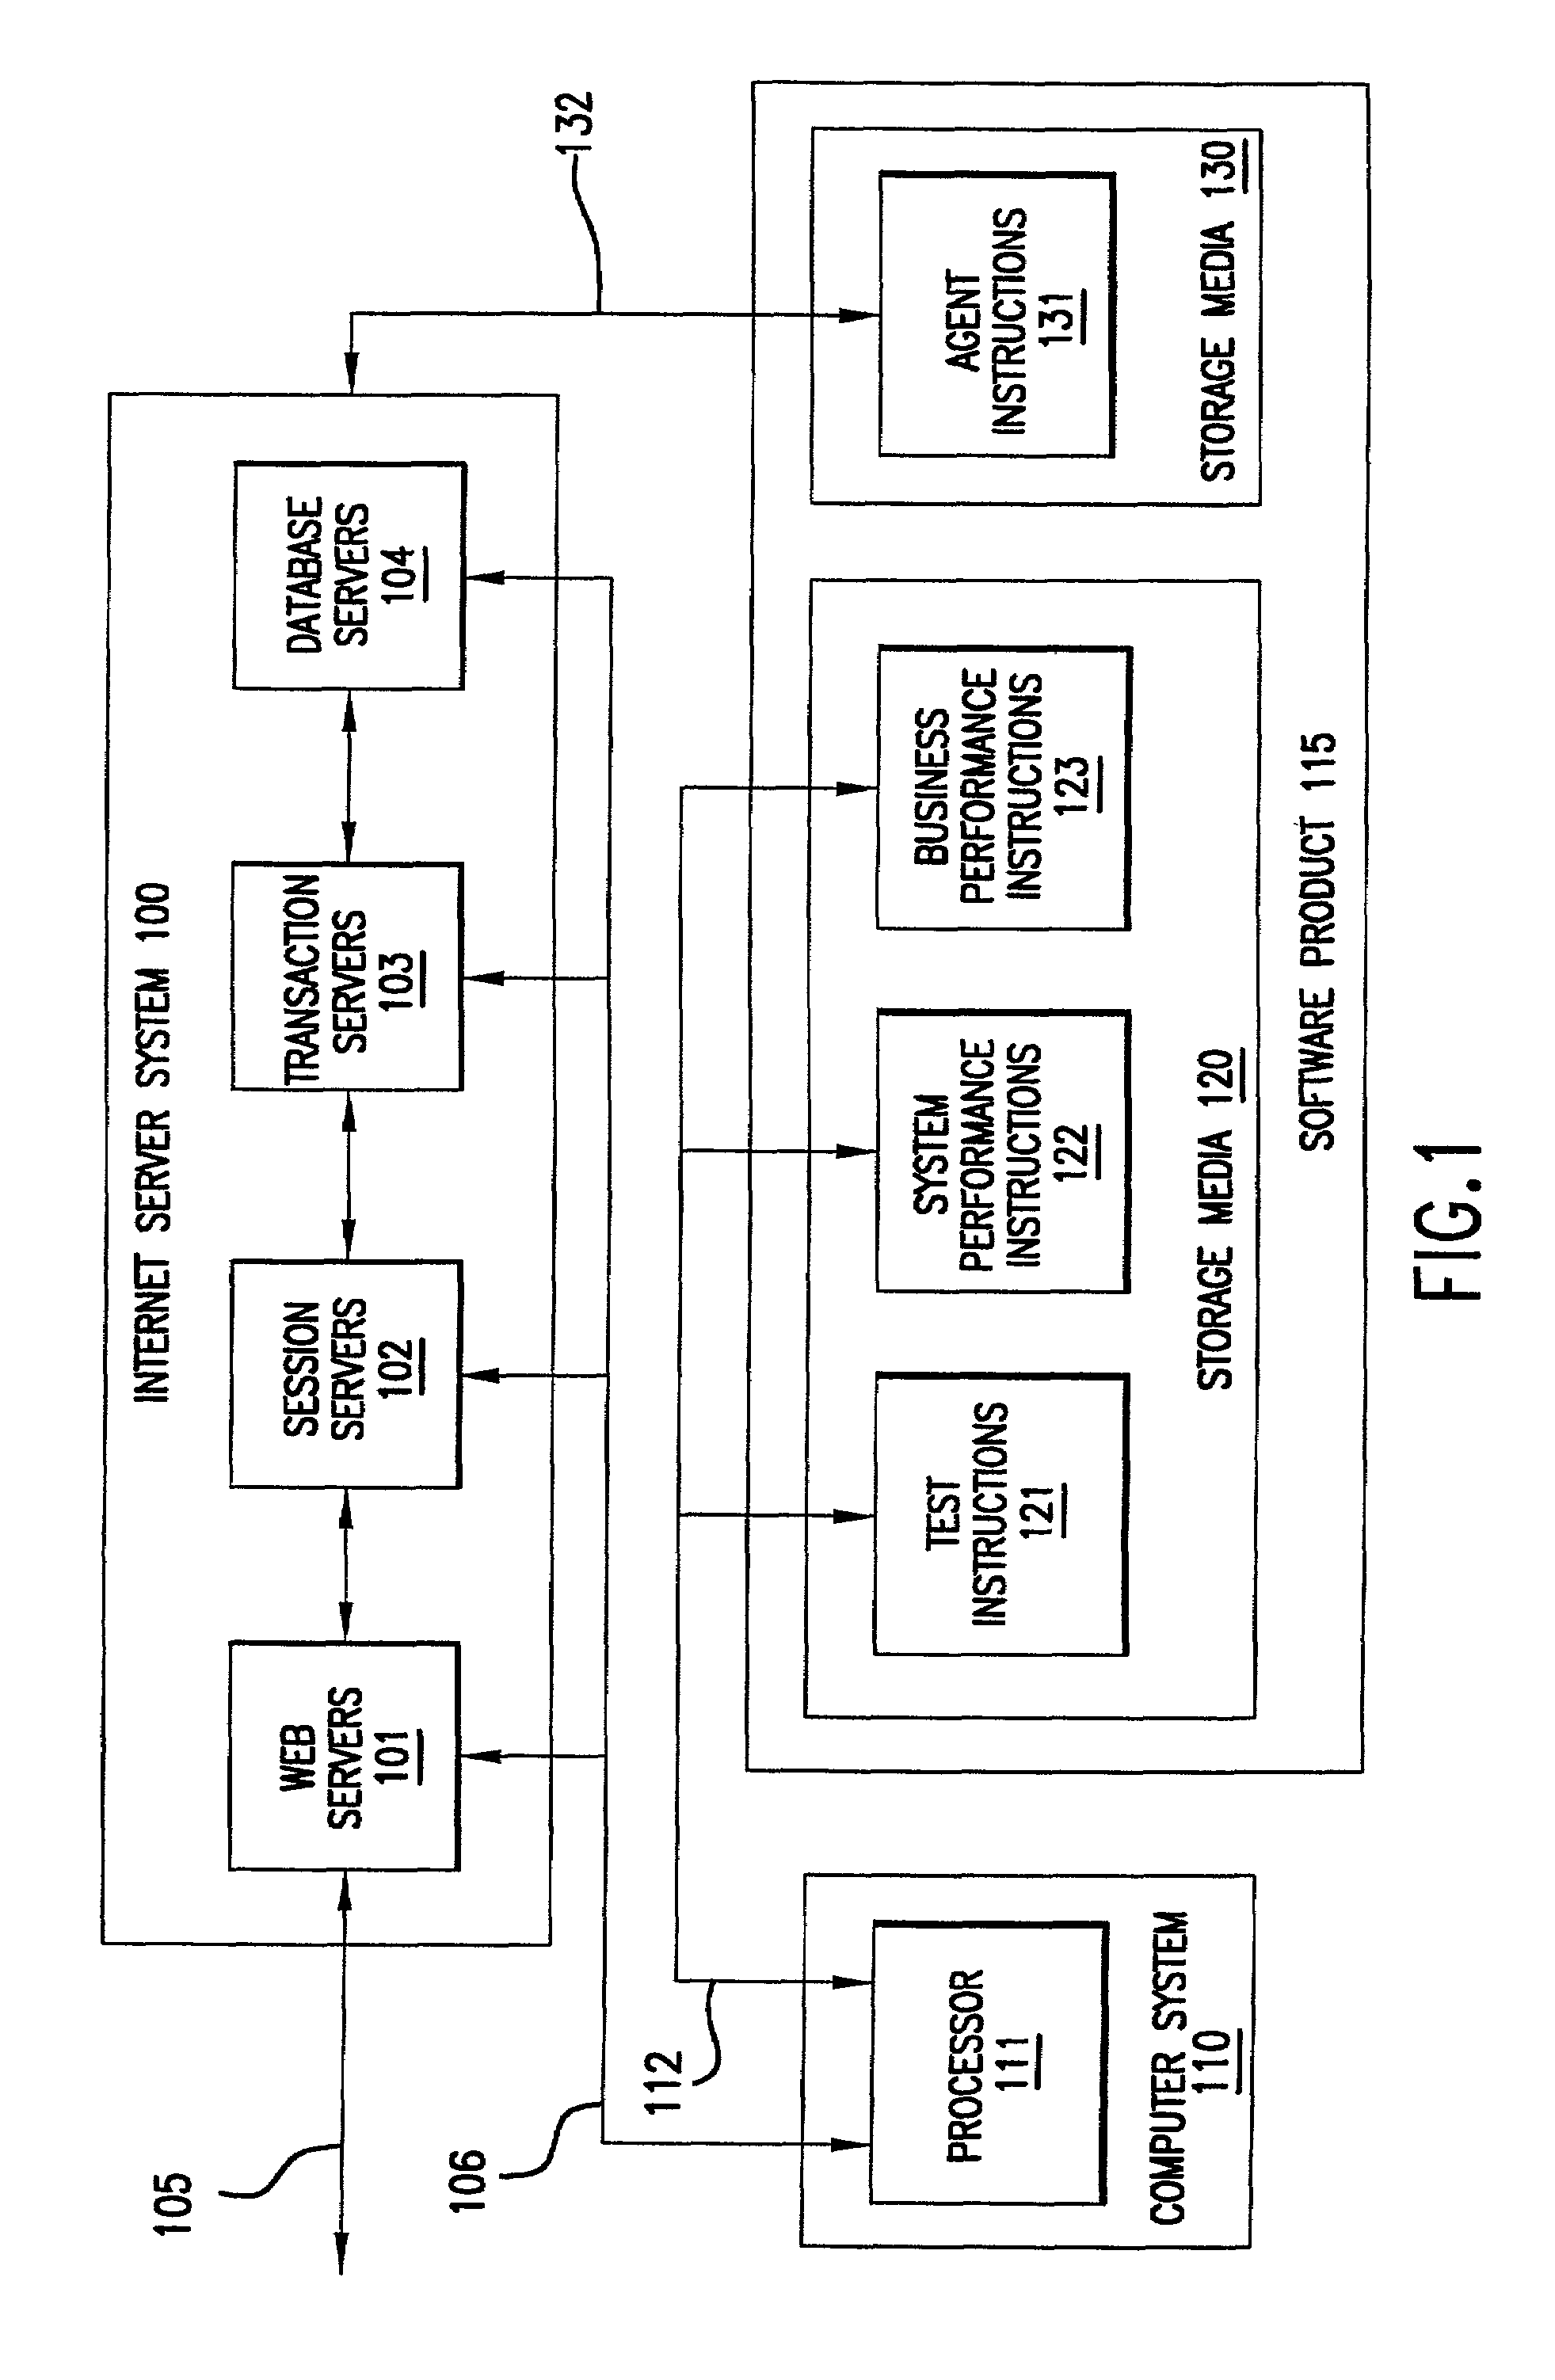 System for recording, editing and playing back web-based transactions using a web browser and HTML